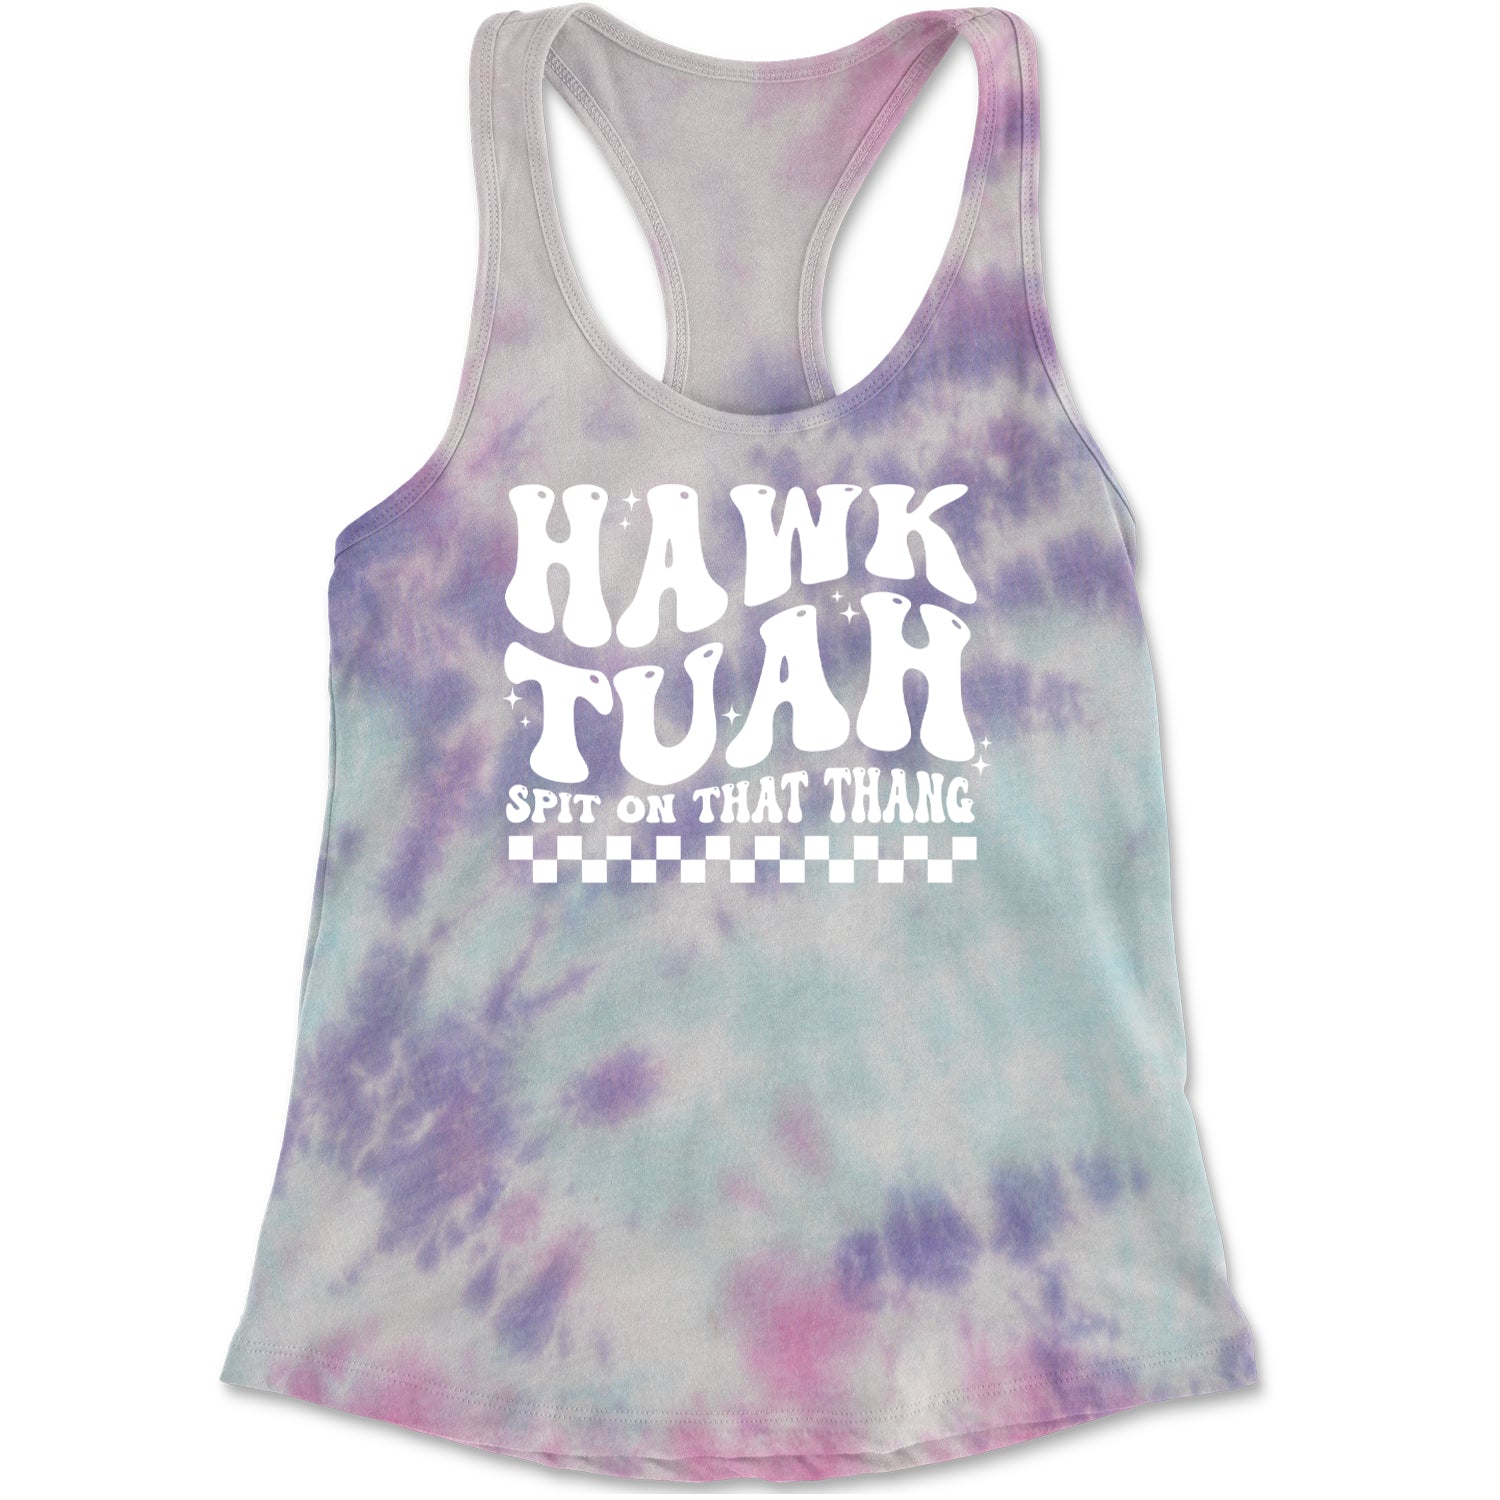 Hawk Tuah Spit On That Thang Racerback Tank Top for Women Cotton Candy